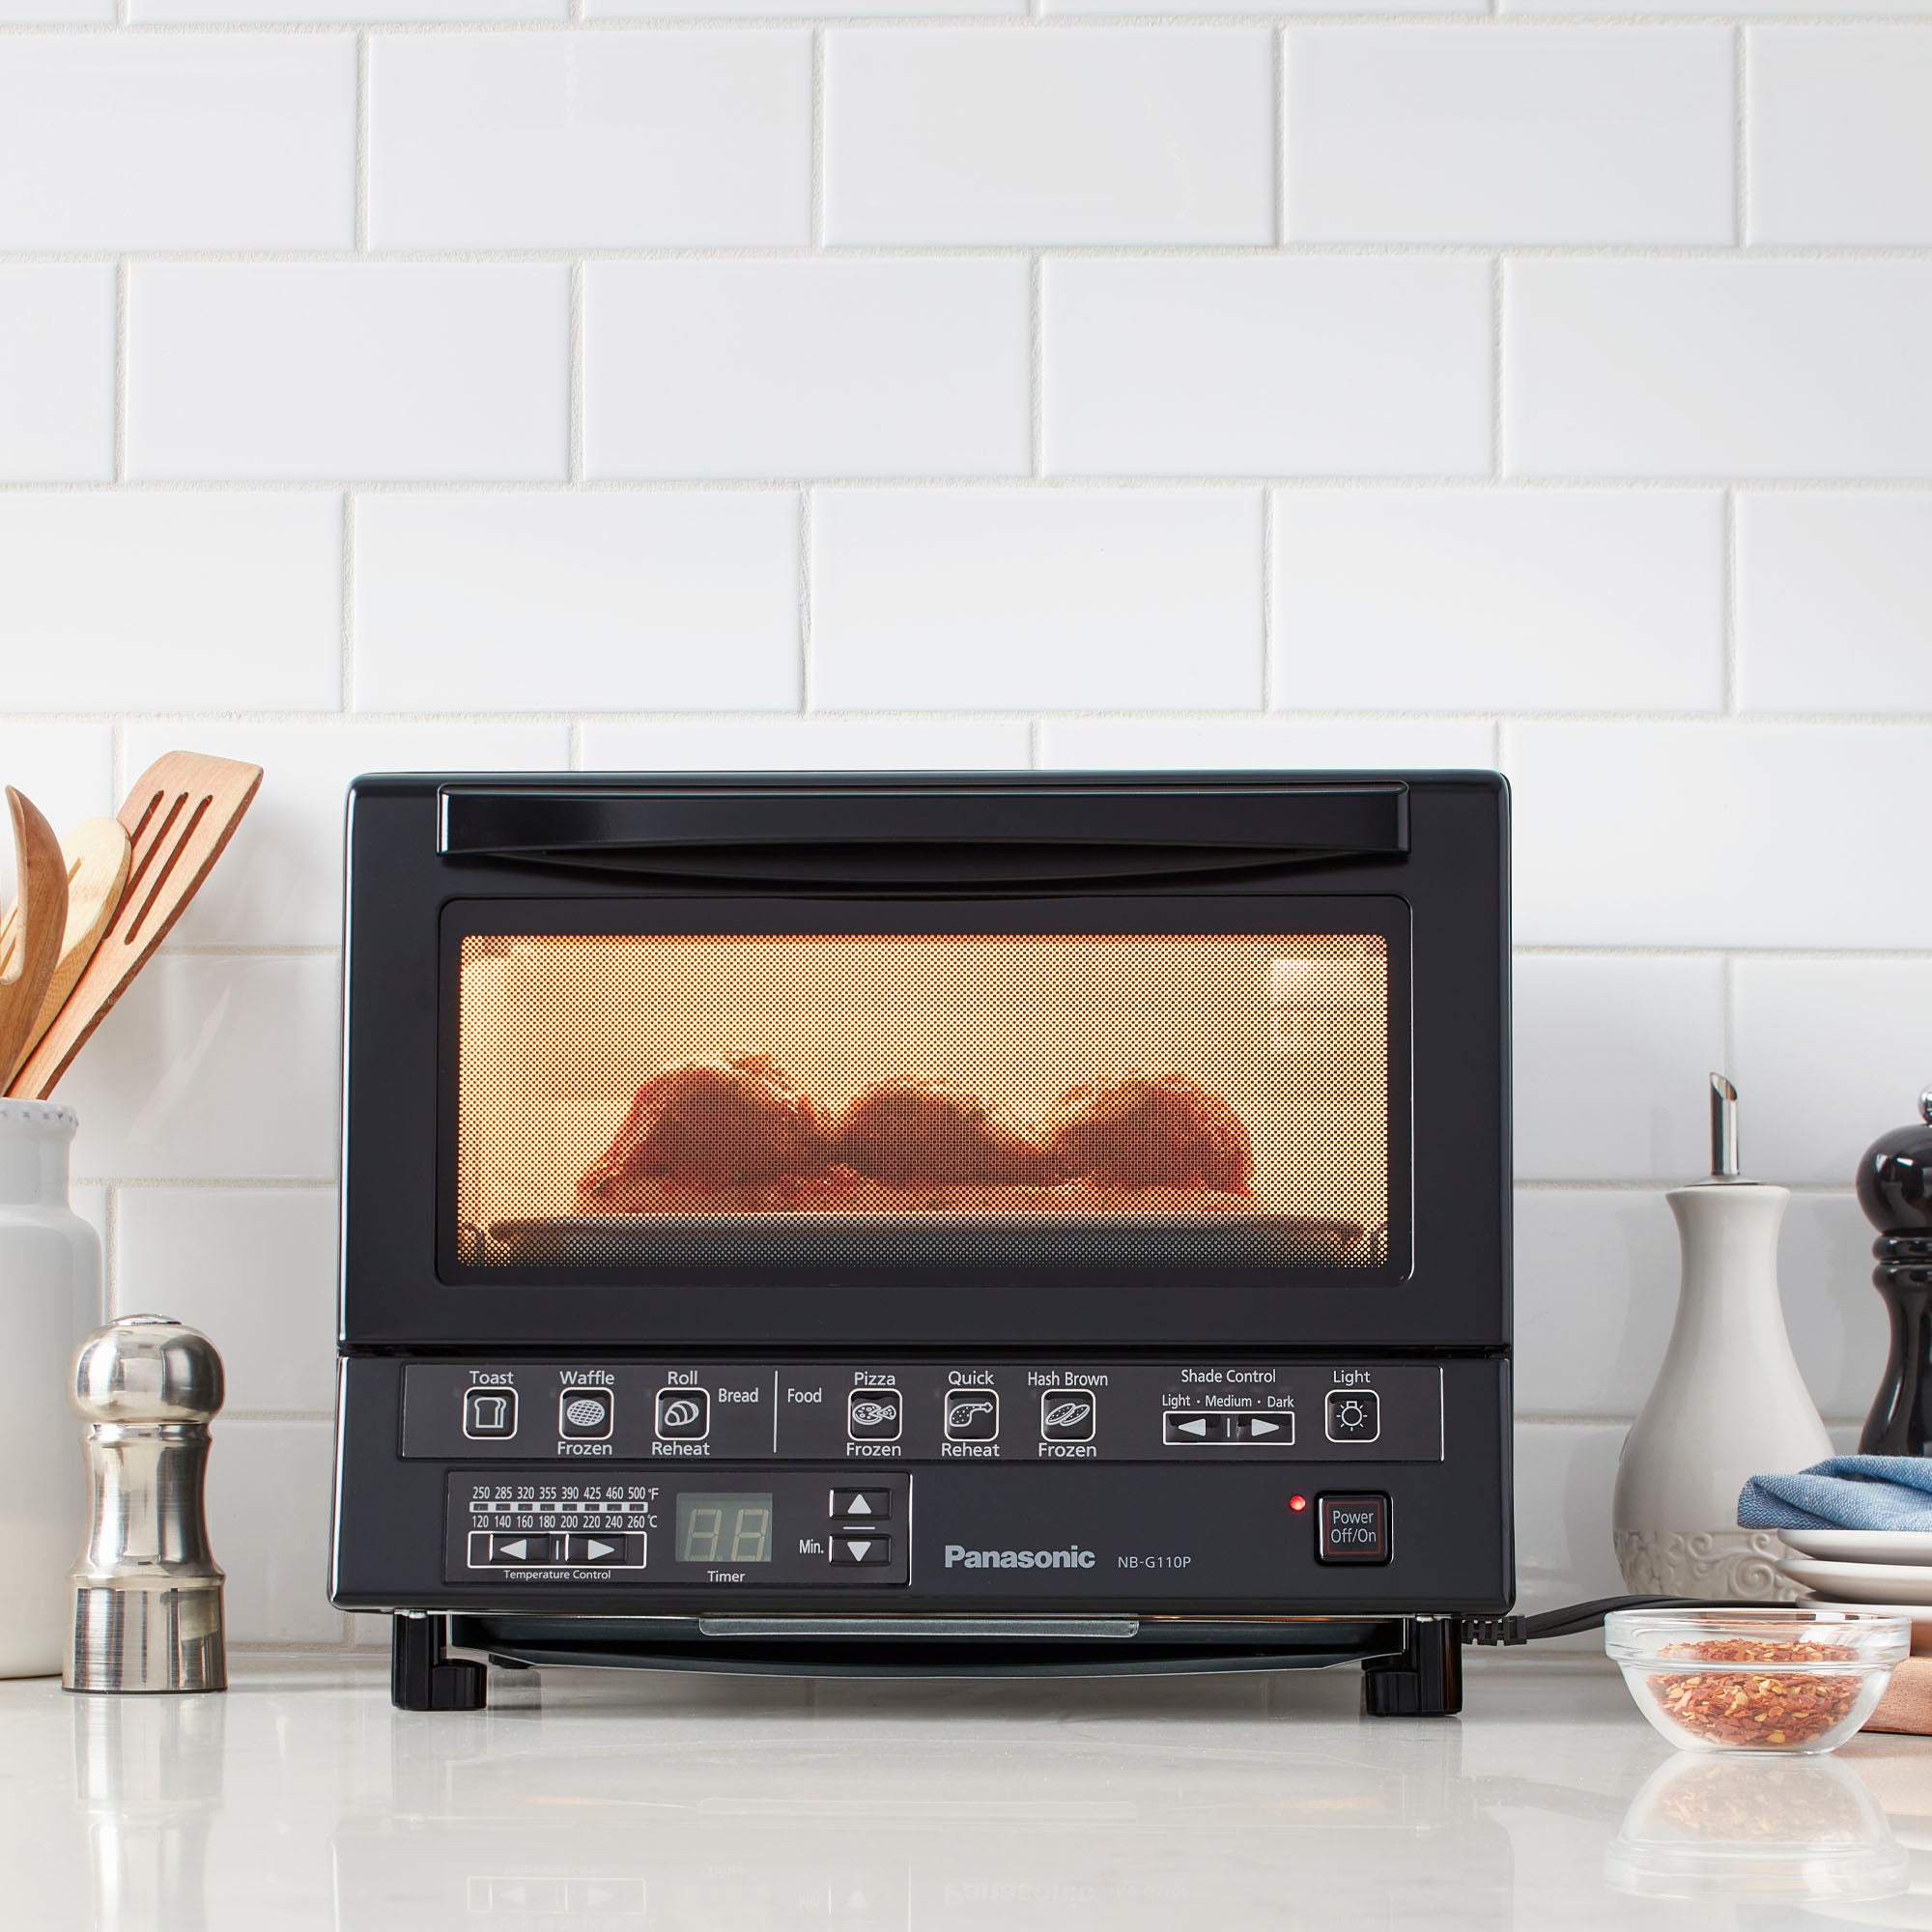 Panasonic Flash Xpress Toaster Oven Review  Pros Cons and 5 Tips for  🍘🥐🍞 (NB-G110P model) 